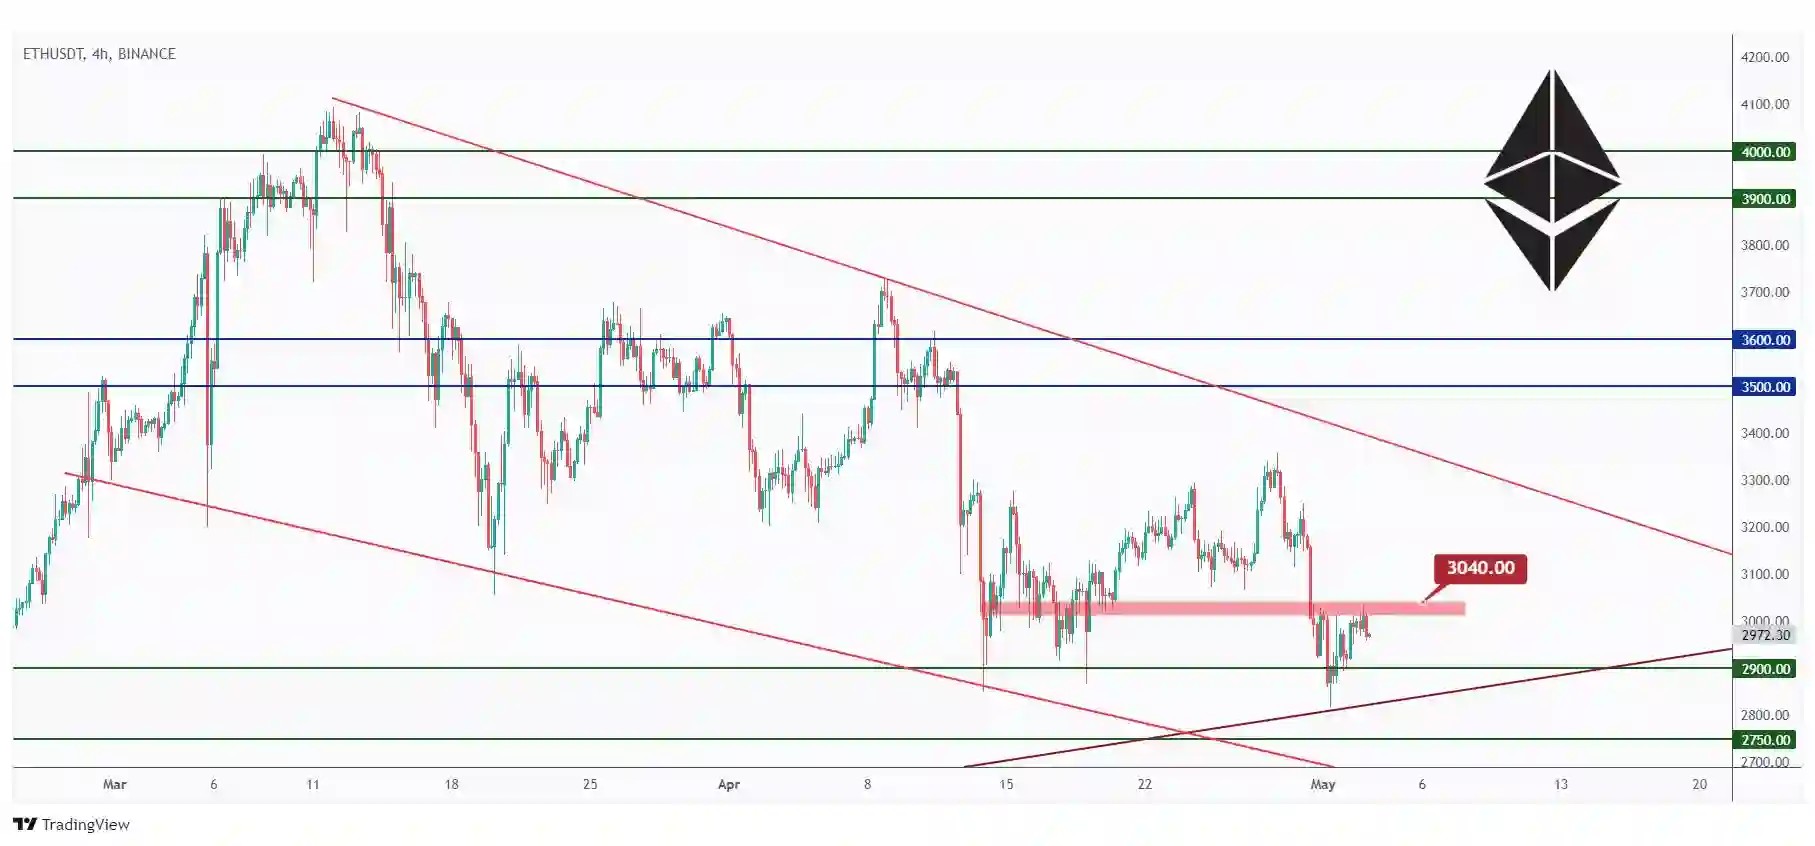 ETH 4h chart hovering around a strong support at $2900, and showing the last major high at $3040 that we need a break above for the bulls to take over.